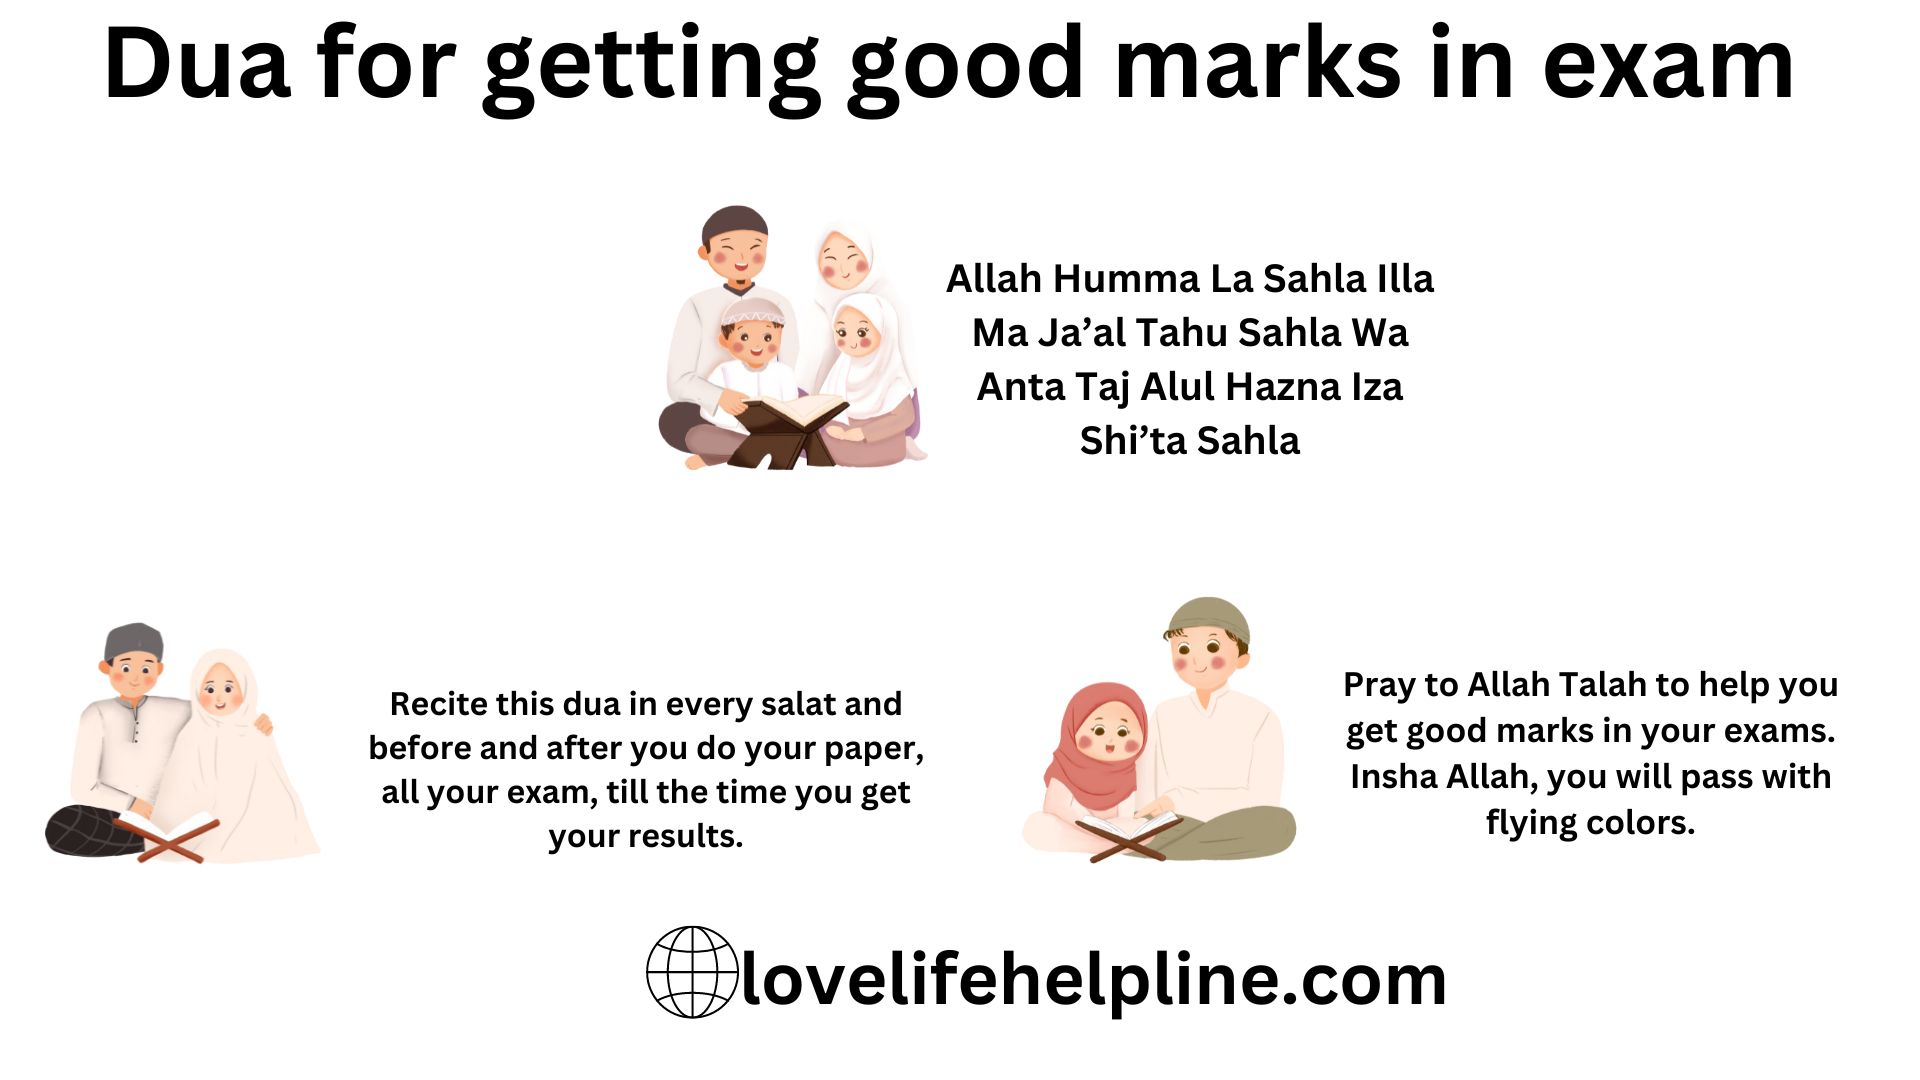 Dua for getting good marks in exam